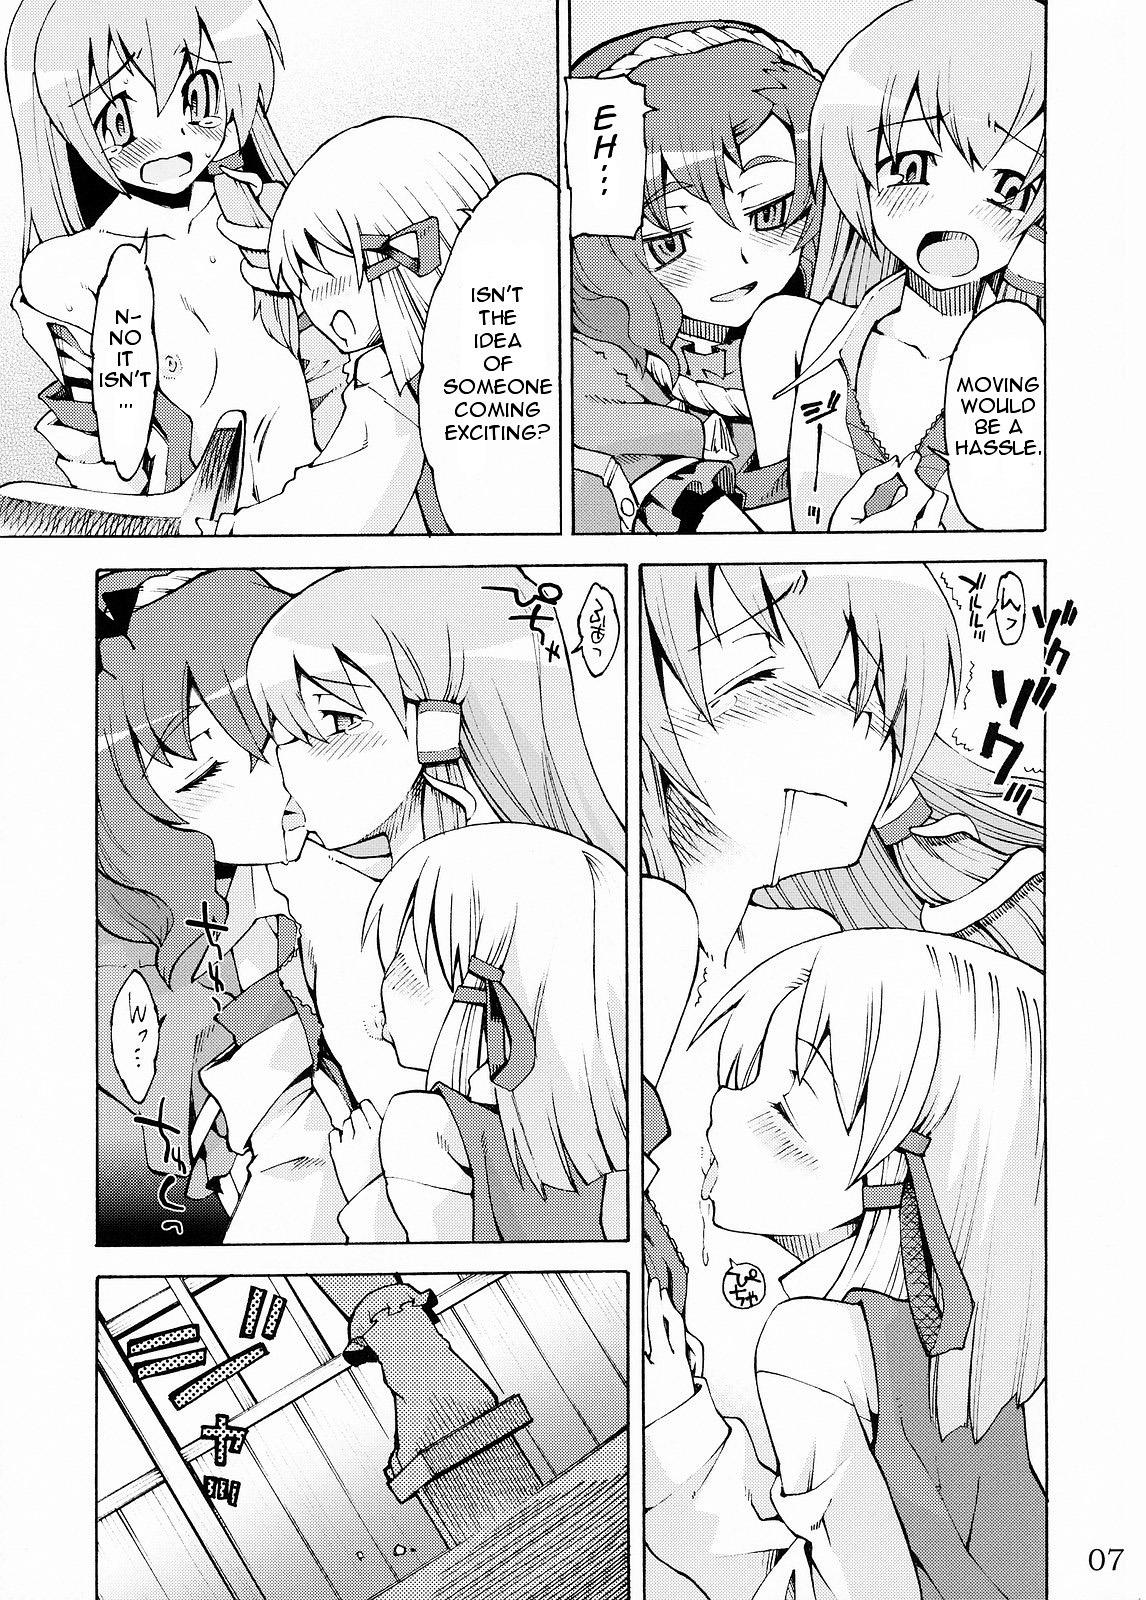 Ethnic Kami-sama to Issho! Happy every day! - Touhou project Amateur Porn - Page 7